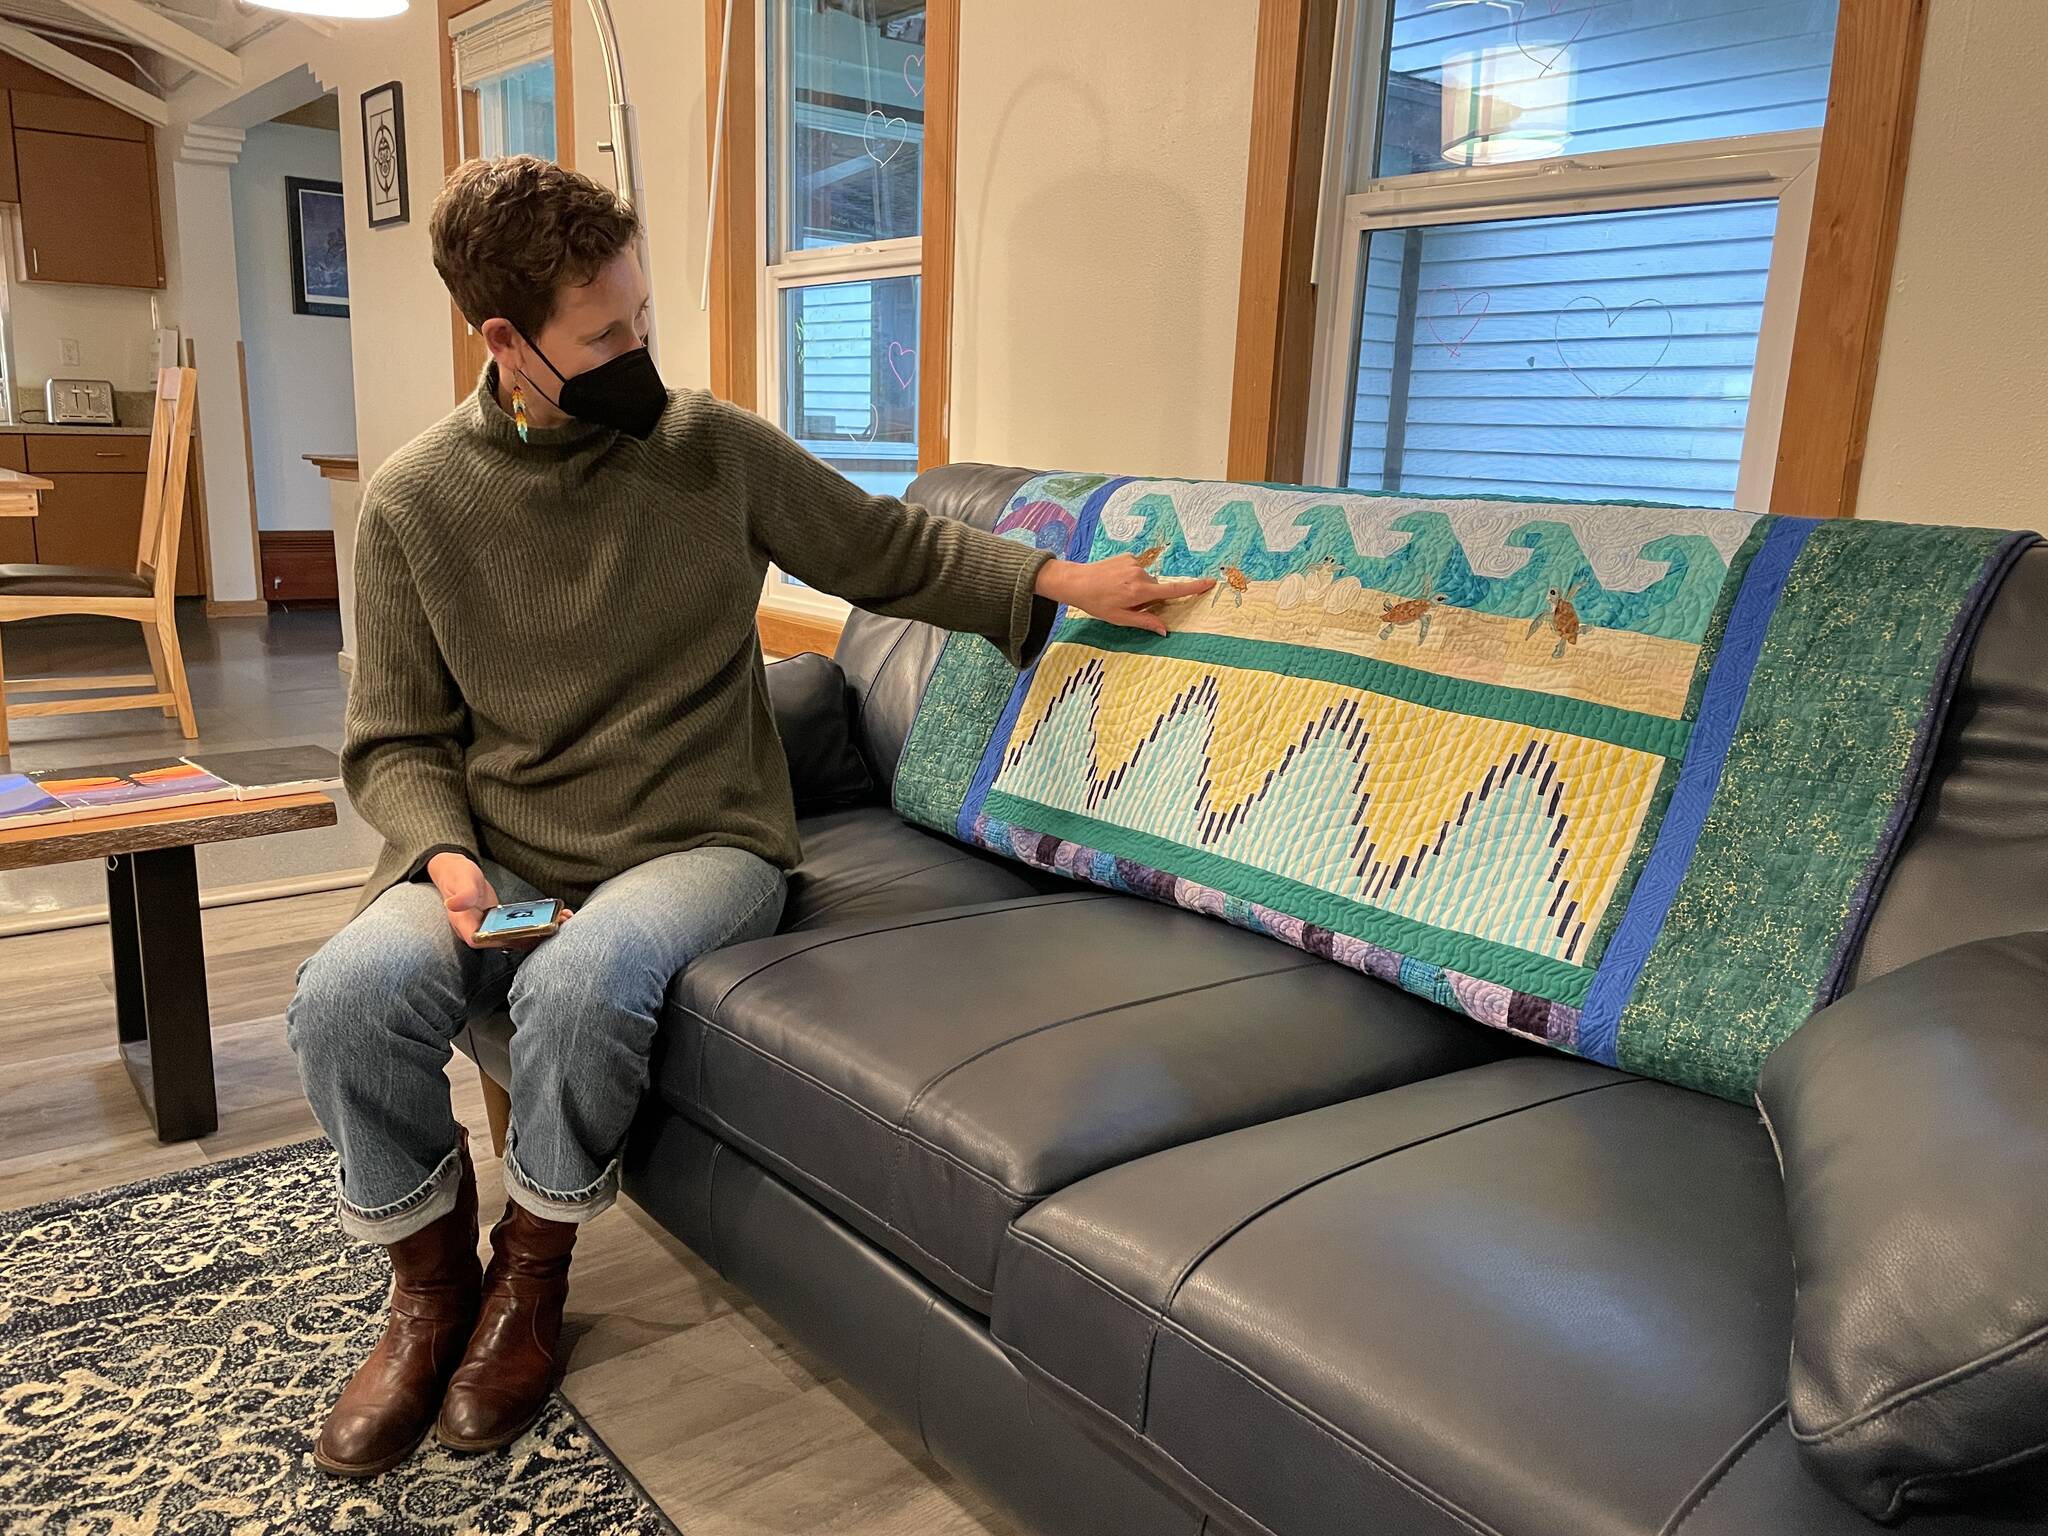 Zach Gordon Youth Center manager Jorden Nigro points out a quilt donated by a Monday night quilting group to Shéiyi X̱aat Hít, or Spruce Root House, Juneau’s new youth shelter, on Thursday, Sept. 23, 2021. (Michael S. Lockett / Juneau Empire)